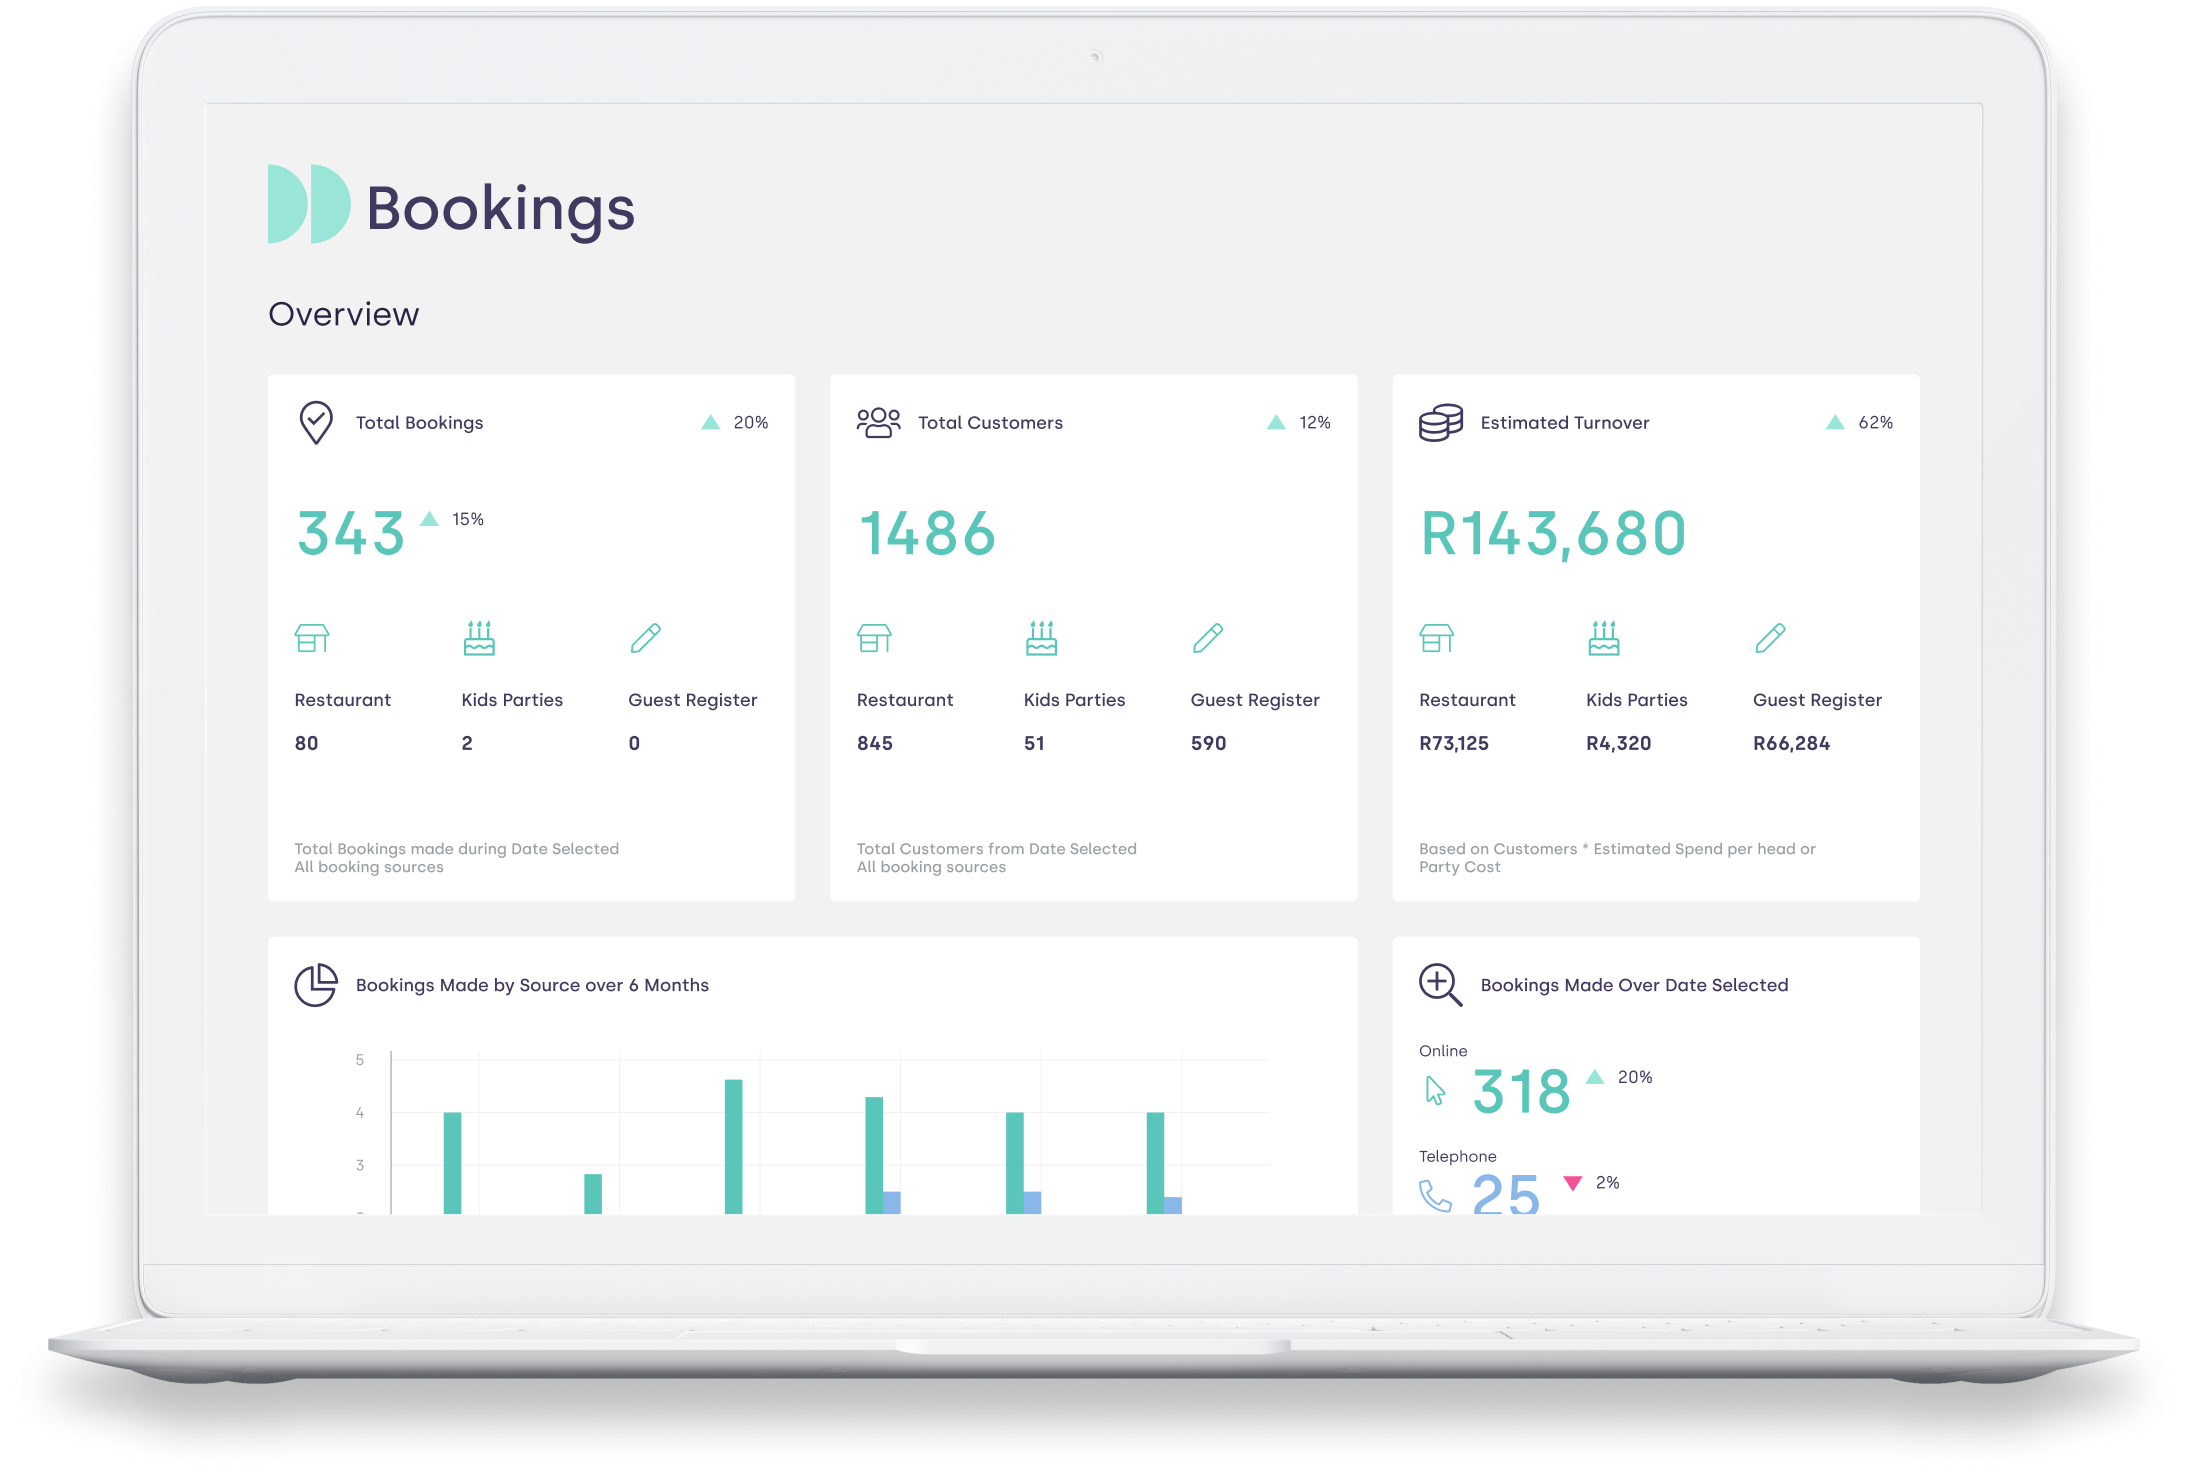 Social Places Software - Bookings Reporting Suite